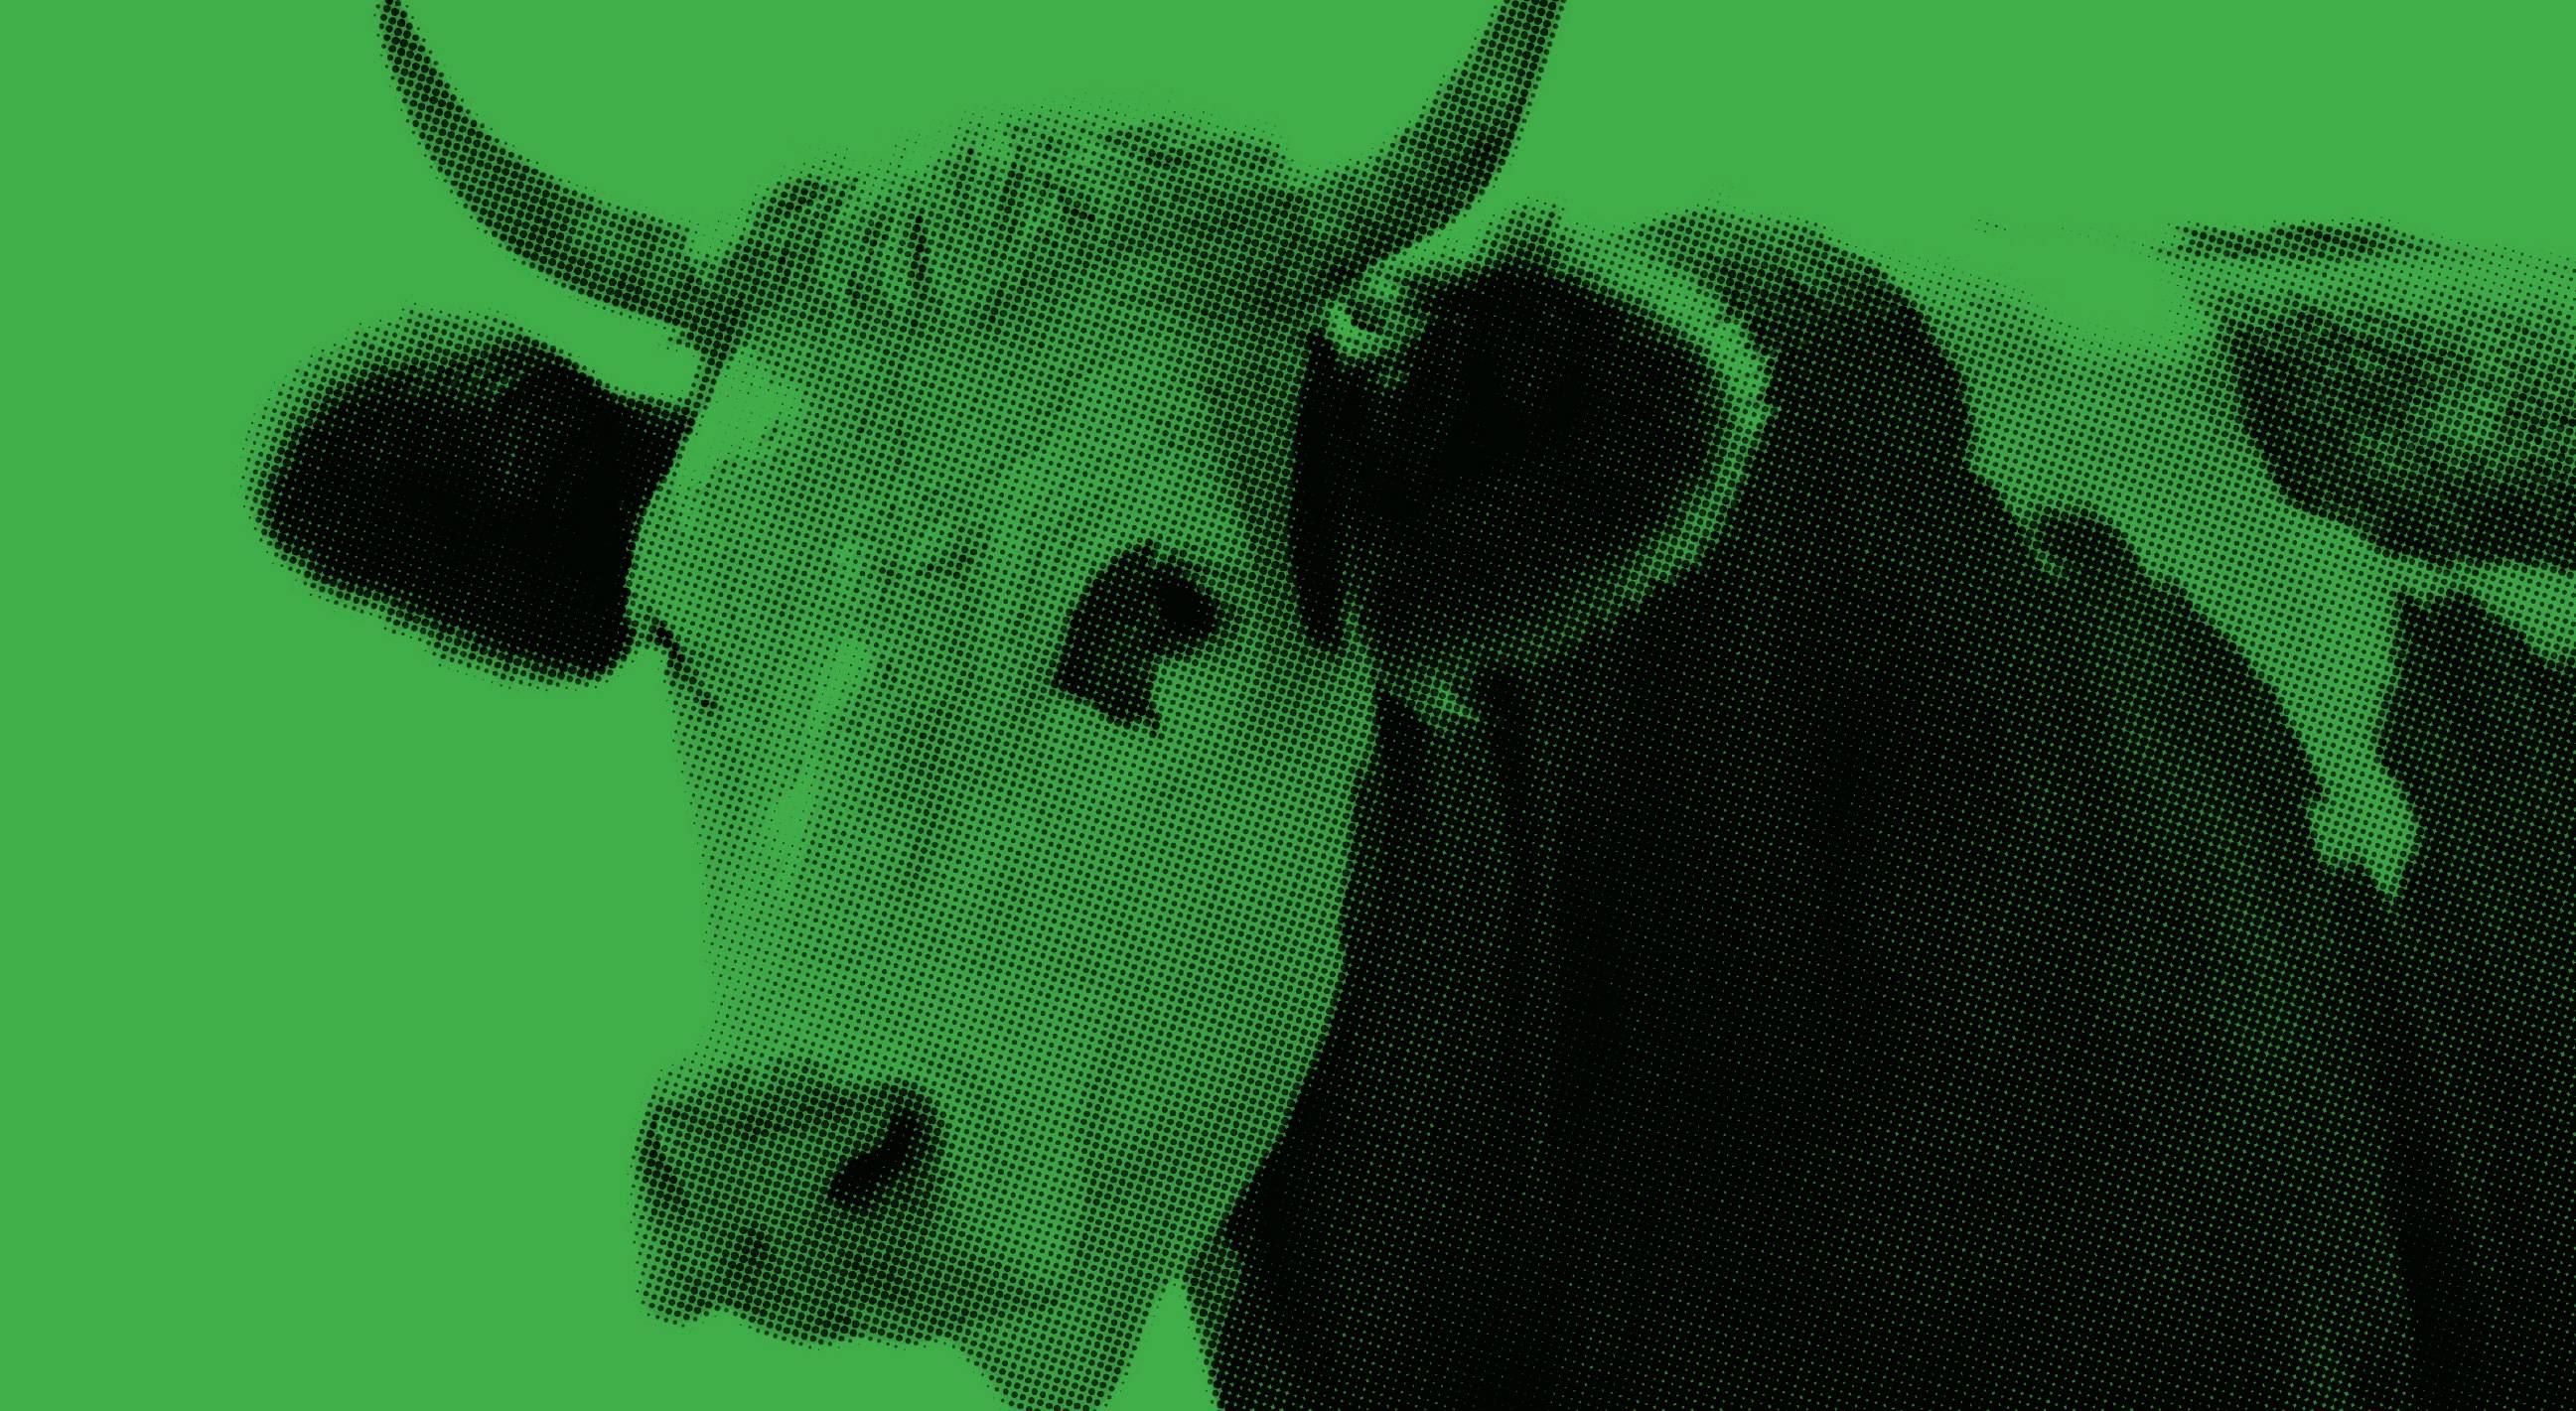 creepy cow with green overlay